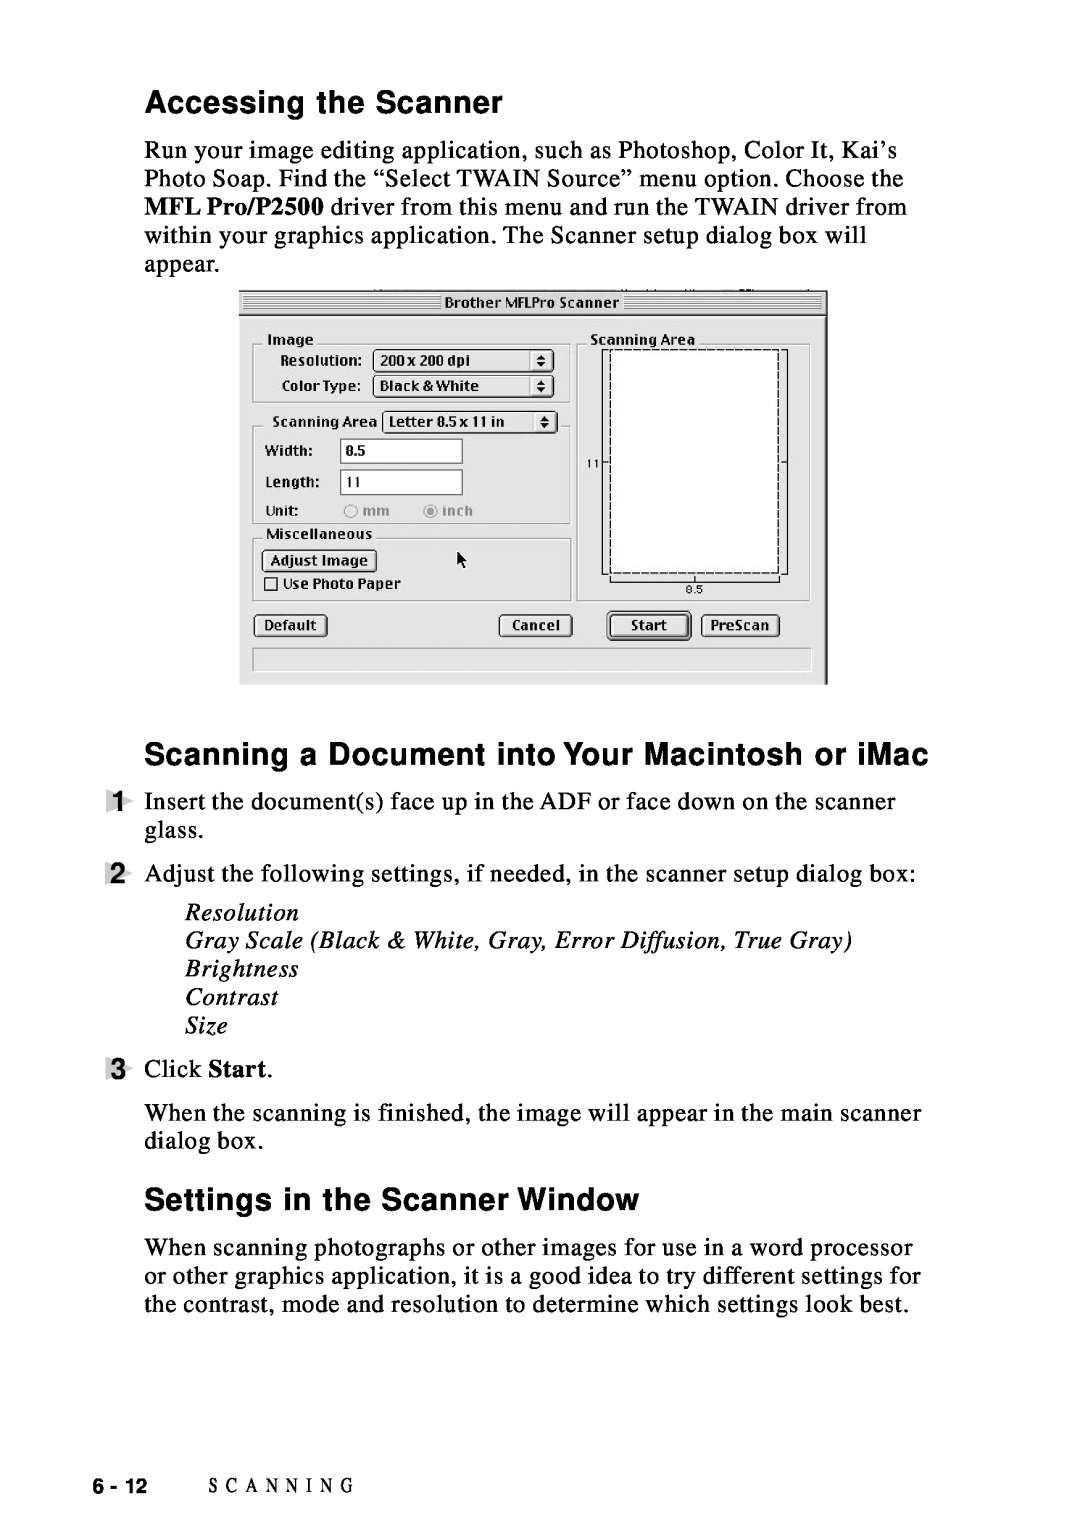 Brother DCP1200 Accessing the Scanner, Scanning a Document into Your Macintosh or iMac, Settings in the Scanner Window 